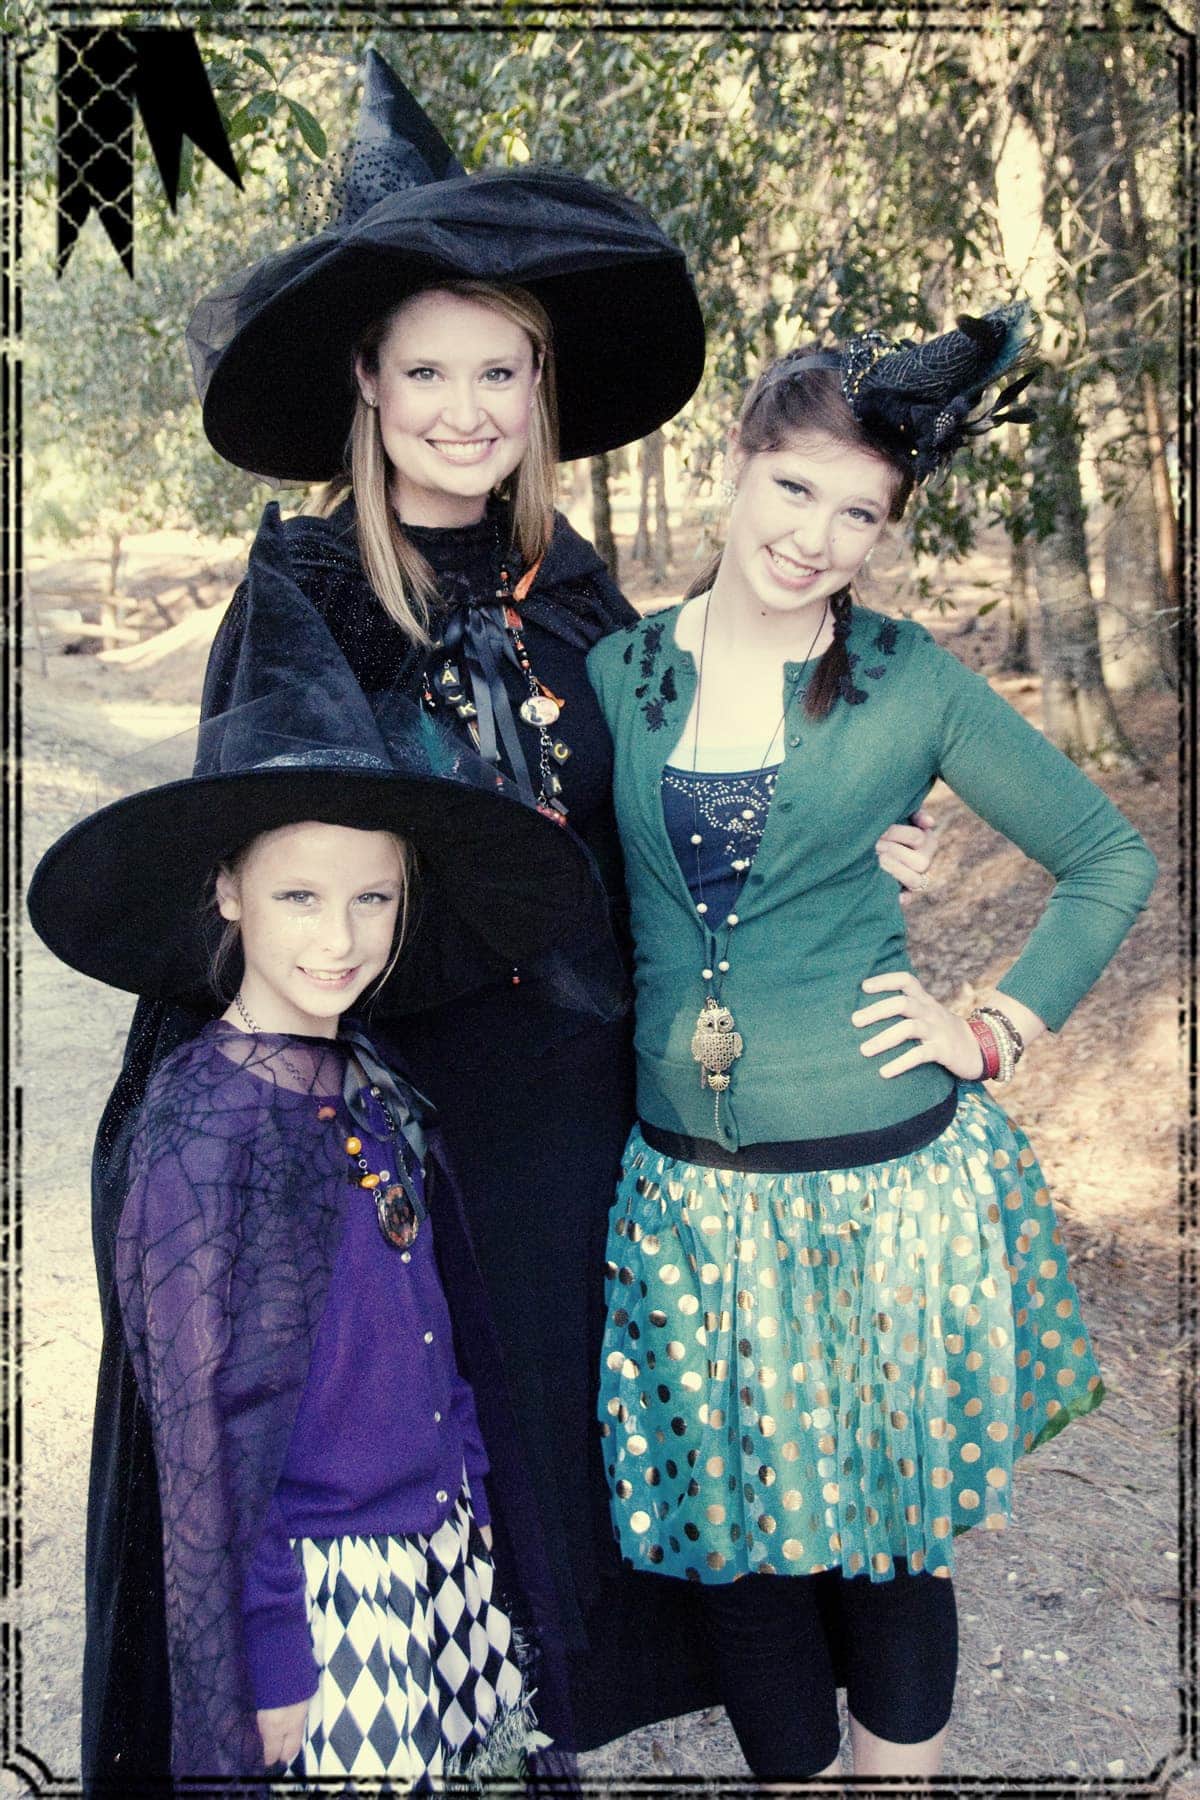 witches costumes